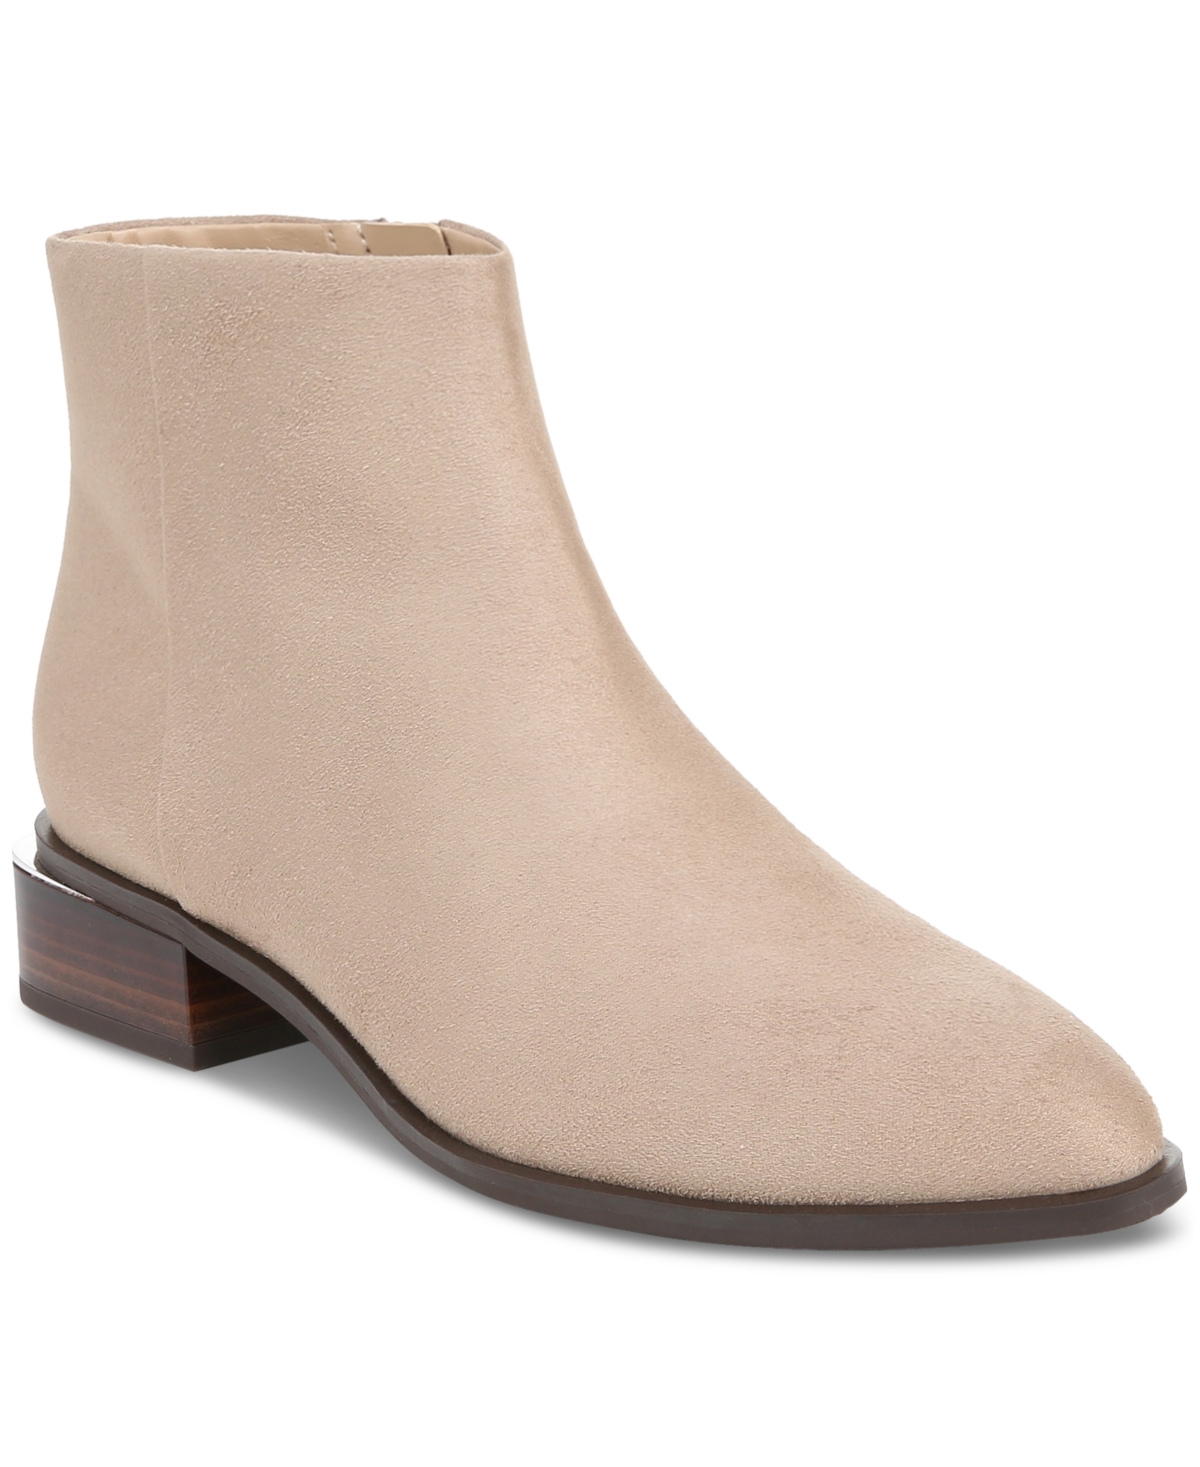 Women's Amyy Pan Ankle Booties, Created for Macy's - Taupe Micro